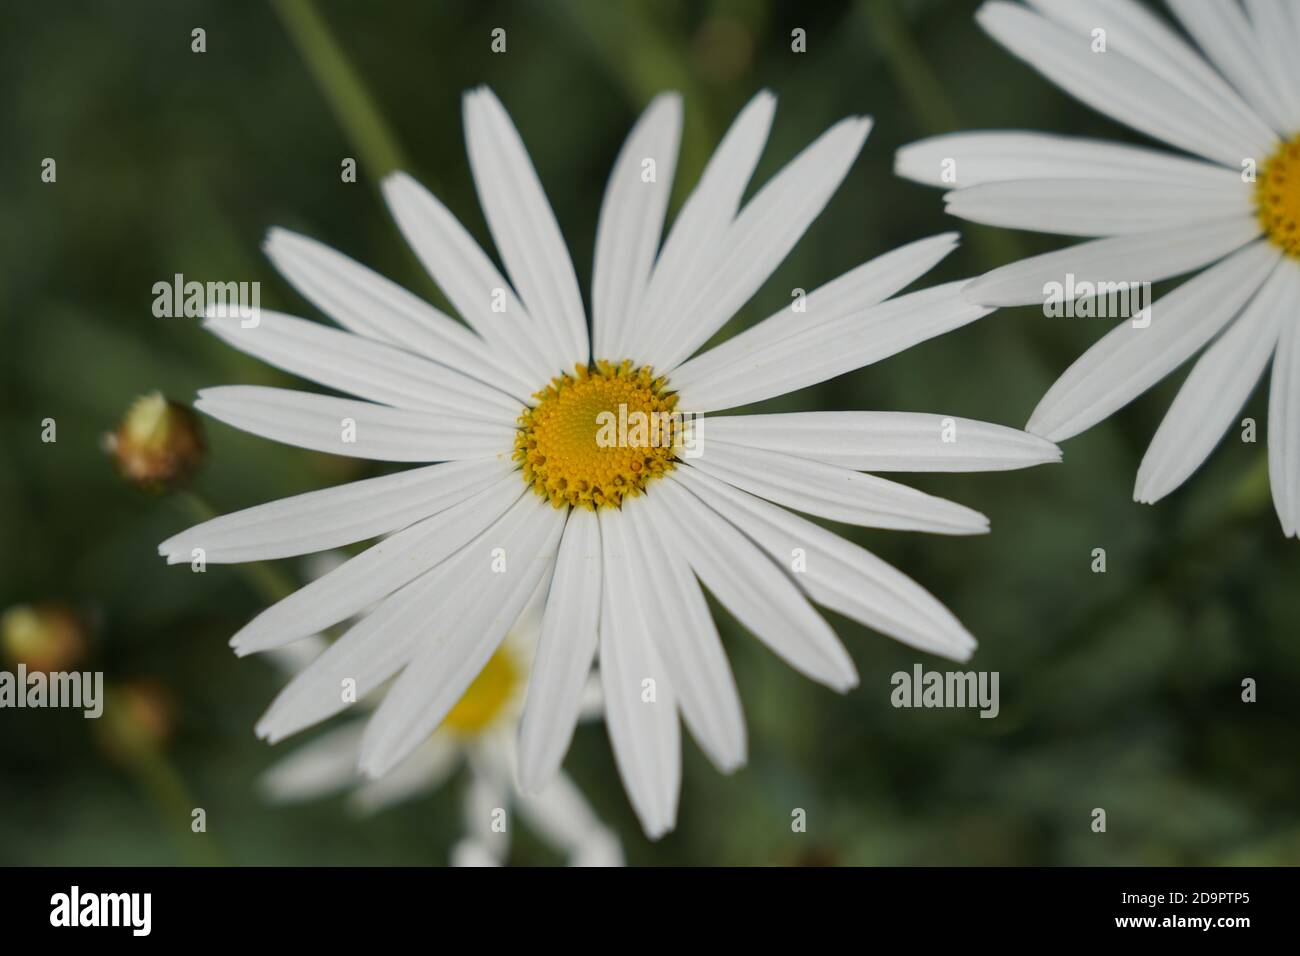 Peace and natural beauty of old fashioned Shasta daisy, perfection in the Australian garden. Stock Photo